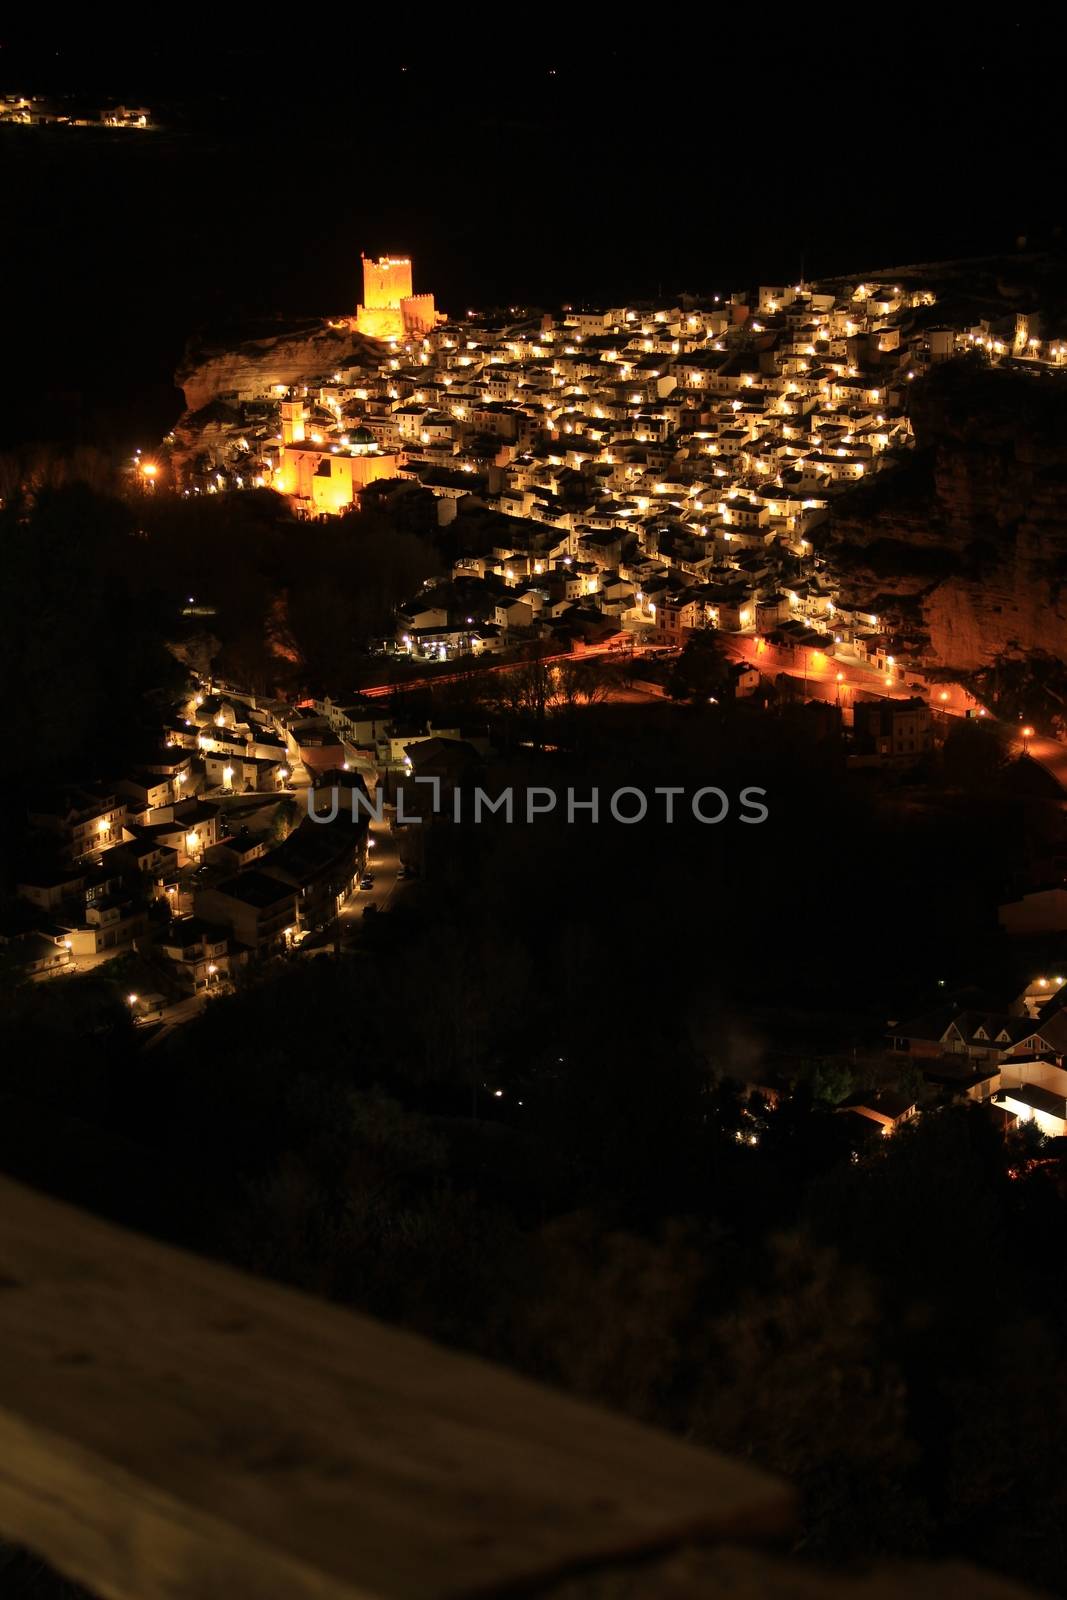 Views of the illuminated village of Alcala del Jucar at night from the viewpoint by soniabonet